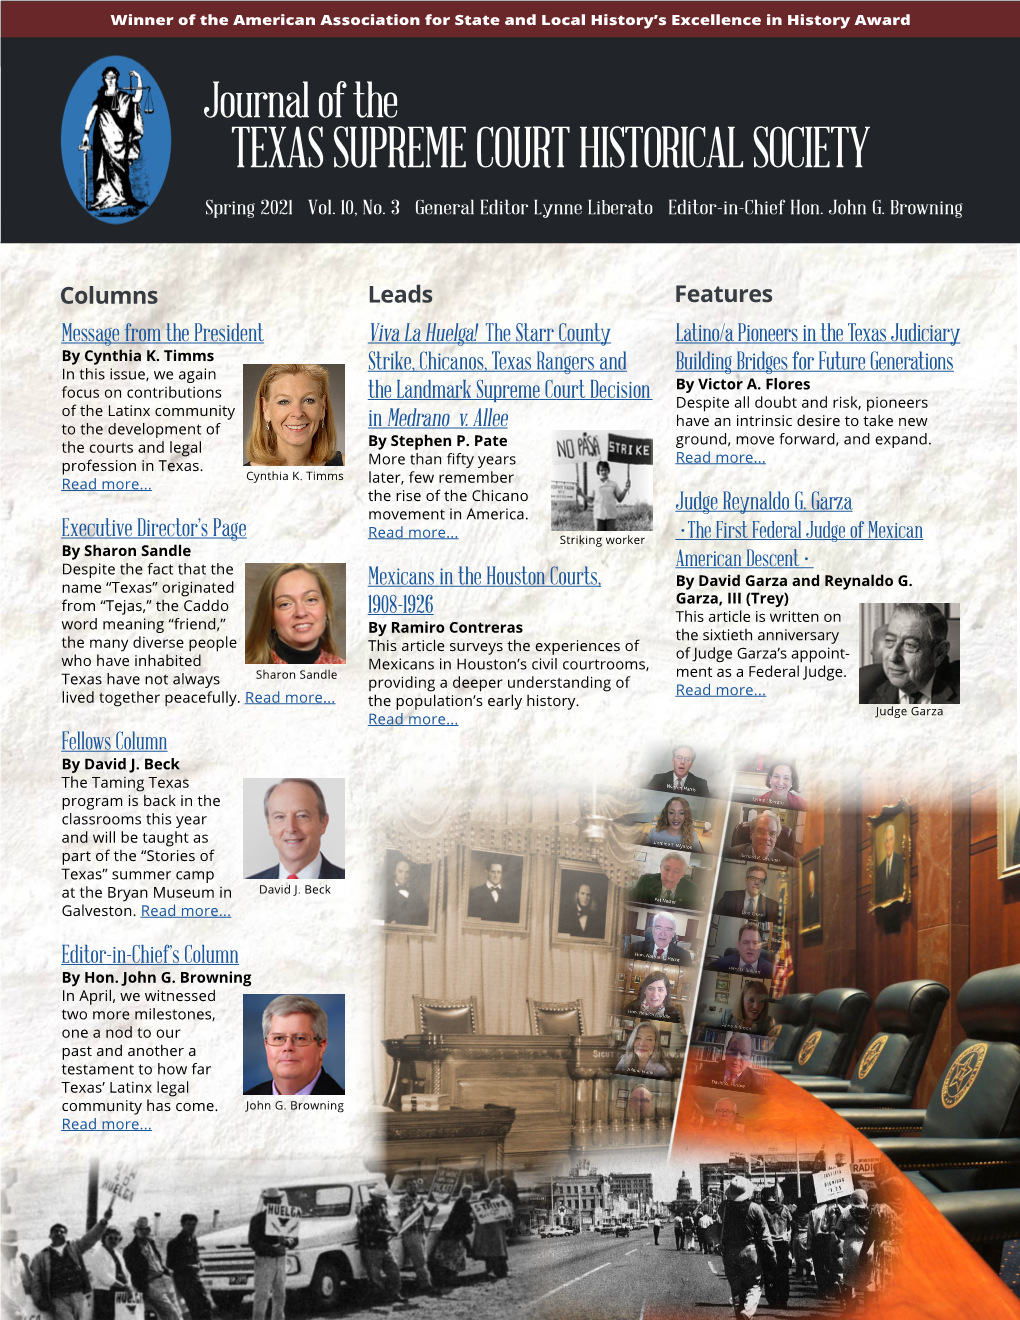 The Starr County Latino/A Pioneers in the Texas Judiciary by Cynthia K